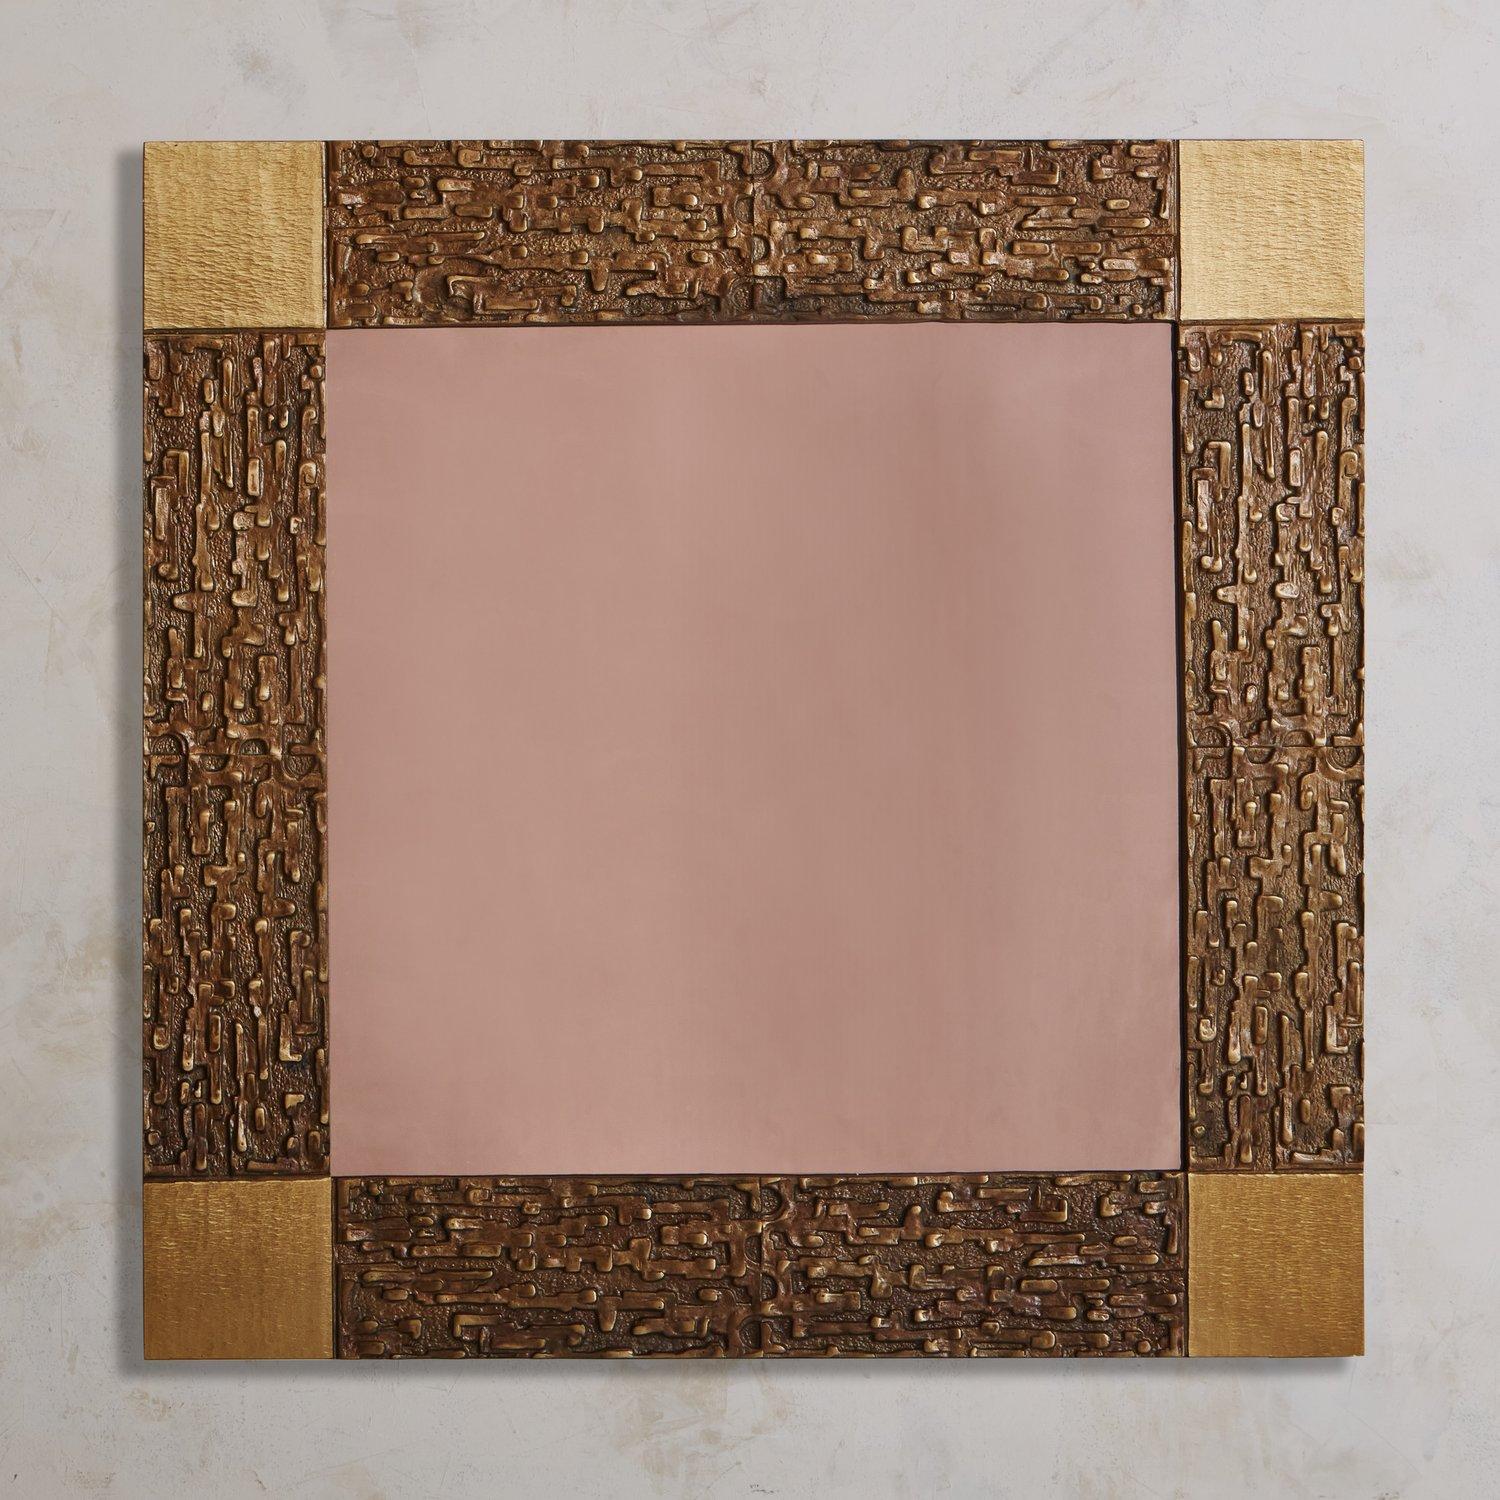 A brutalist rose tinted wall mirror attributed to Luciano Frigerio. This mirror features a square patinated cast brass frame with a captivating textural finish and square corner details. Sourced in France, 1970s.

Luciano Frigerio (1928-1999) was